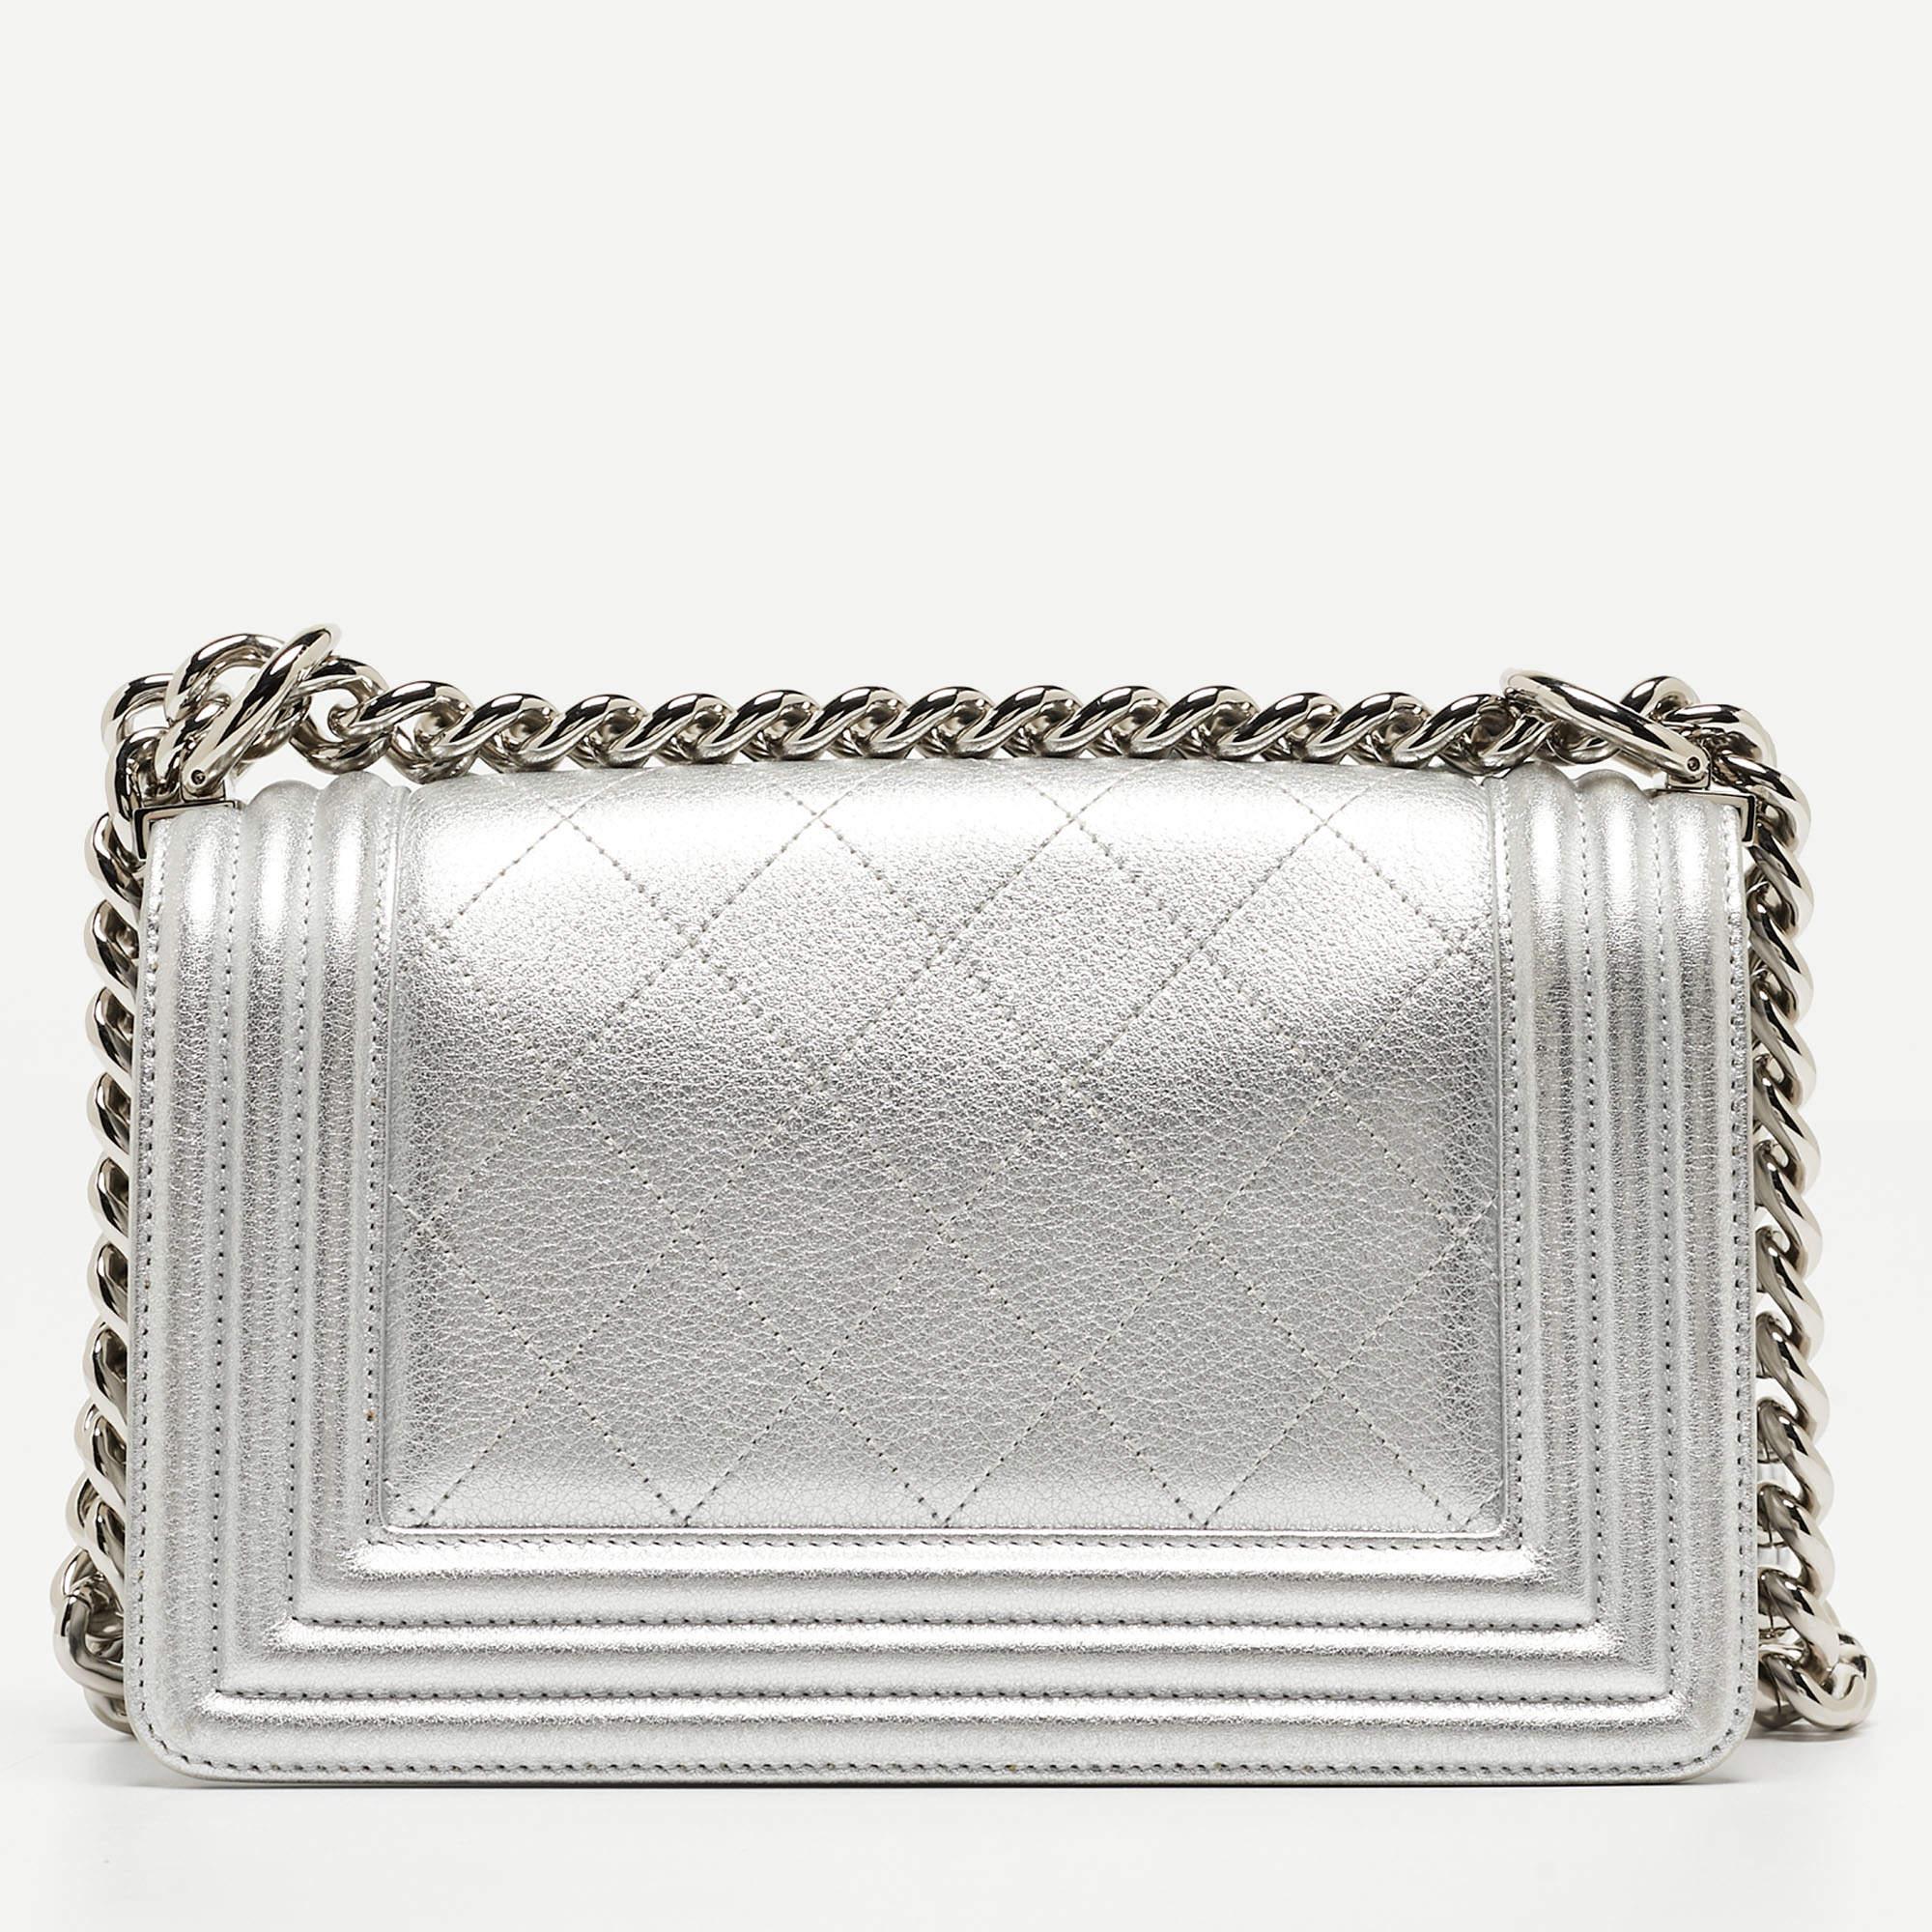 Chanel Silver Quilted Leather Small Camellia Applique Boy Flap Bag For Sale 1